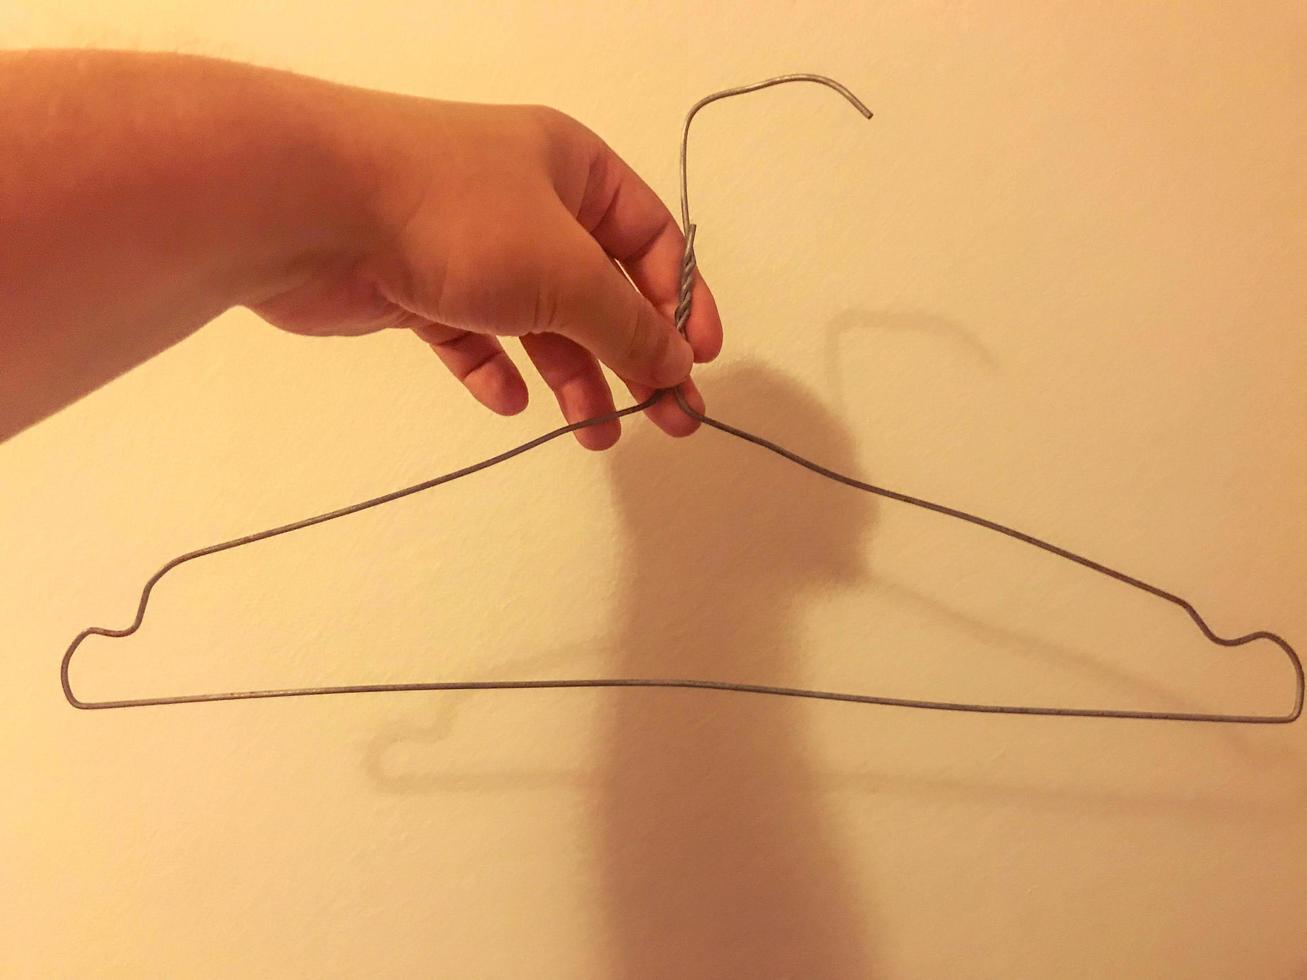 homemade wire hanger for clothes. clumsy, uneven hanger with your own hands. storing clothes in a poor man's wardrobe photo